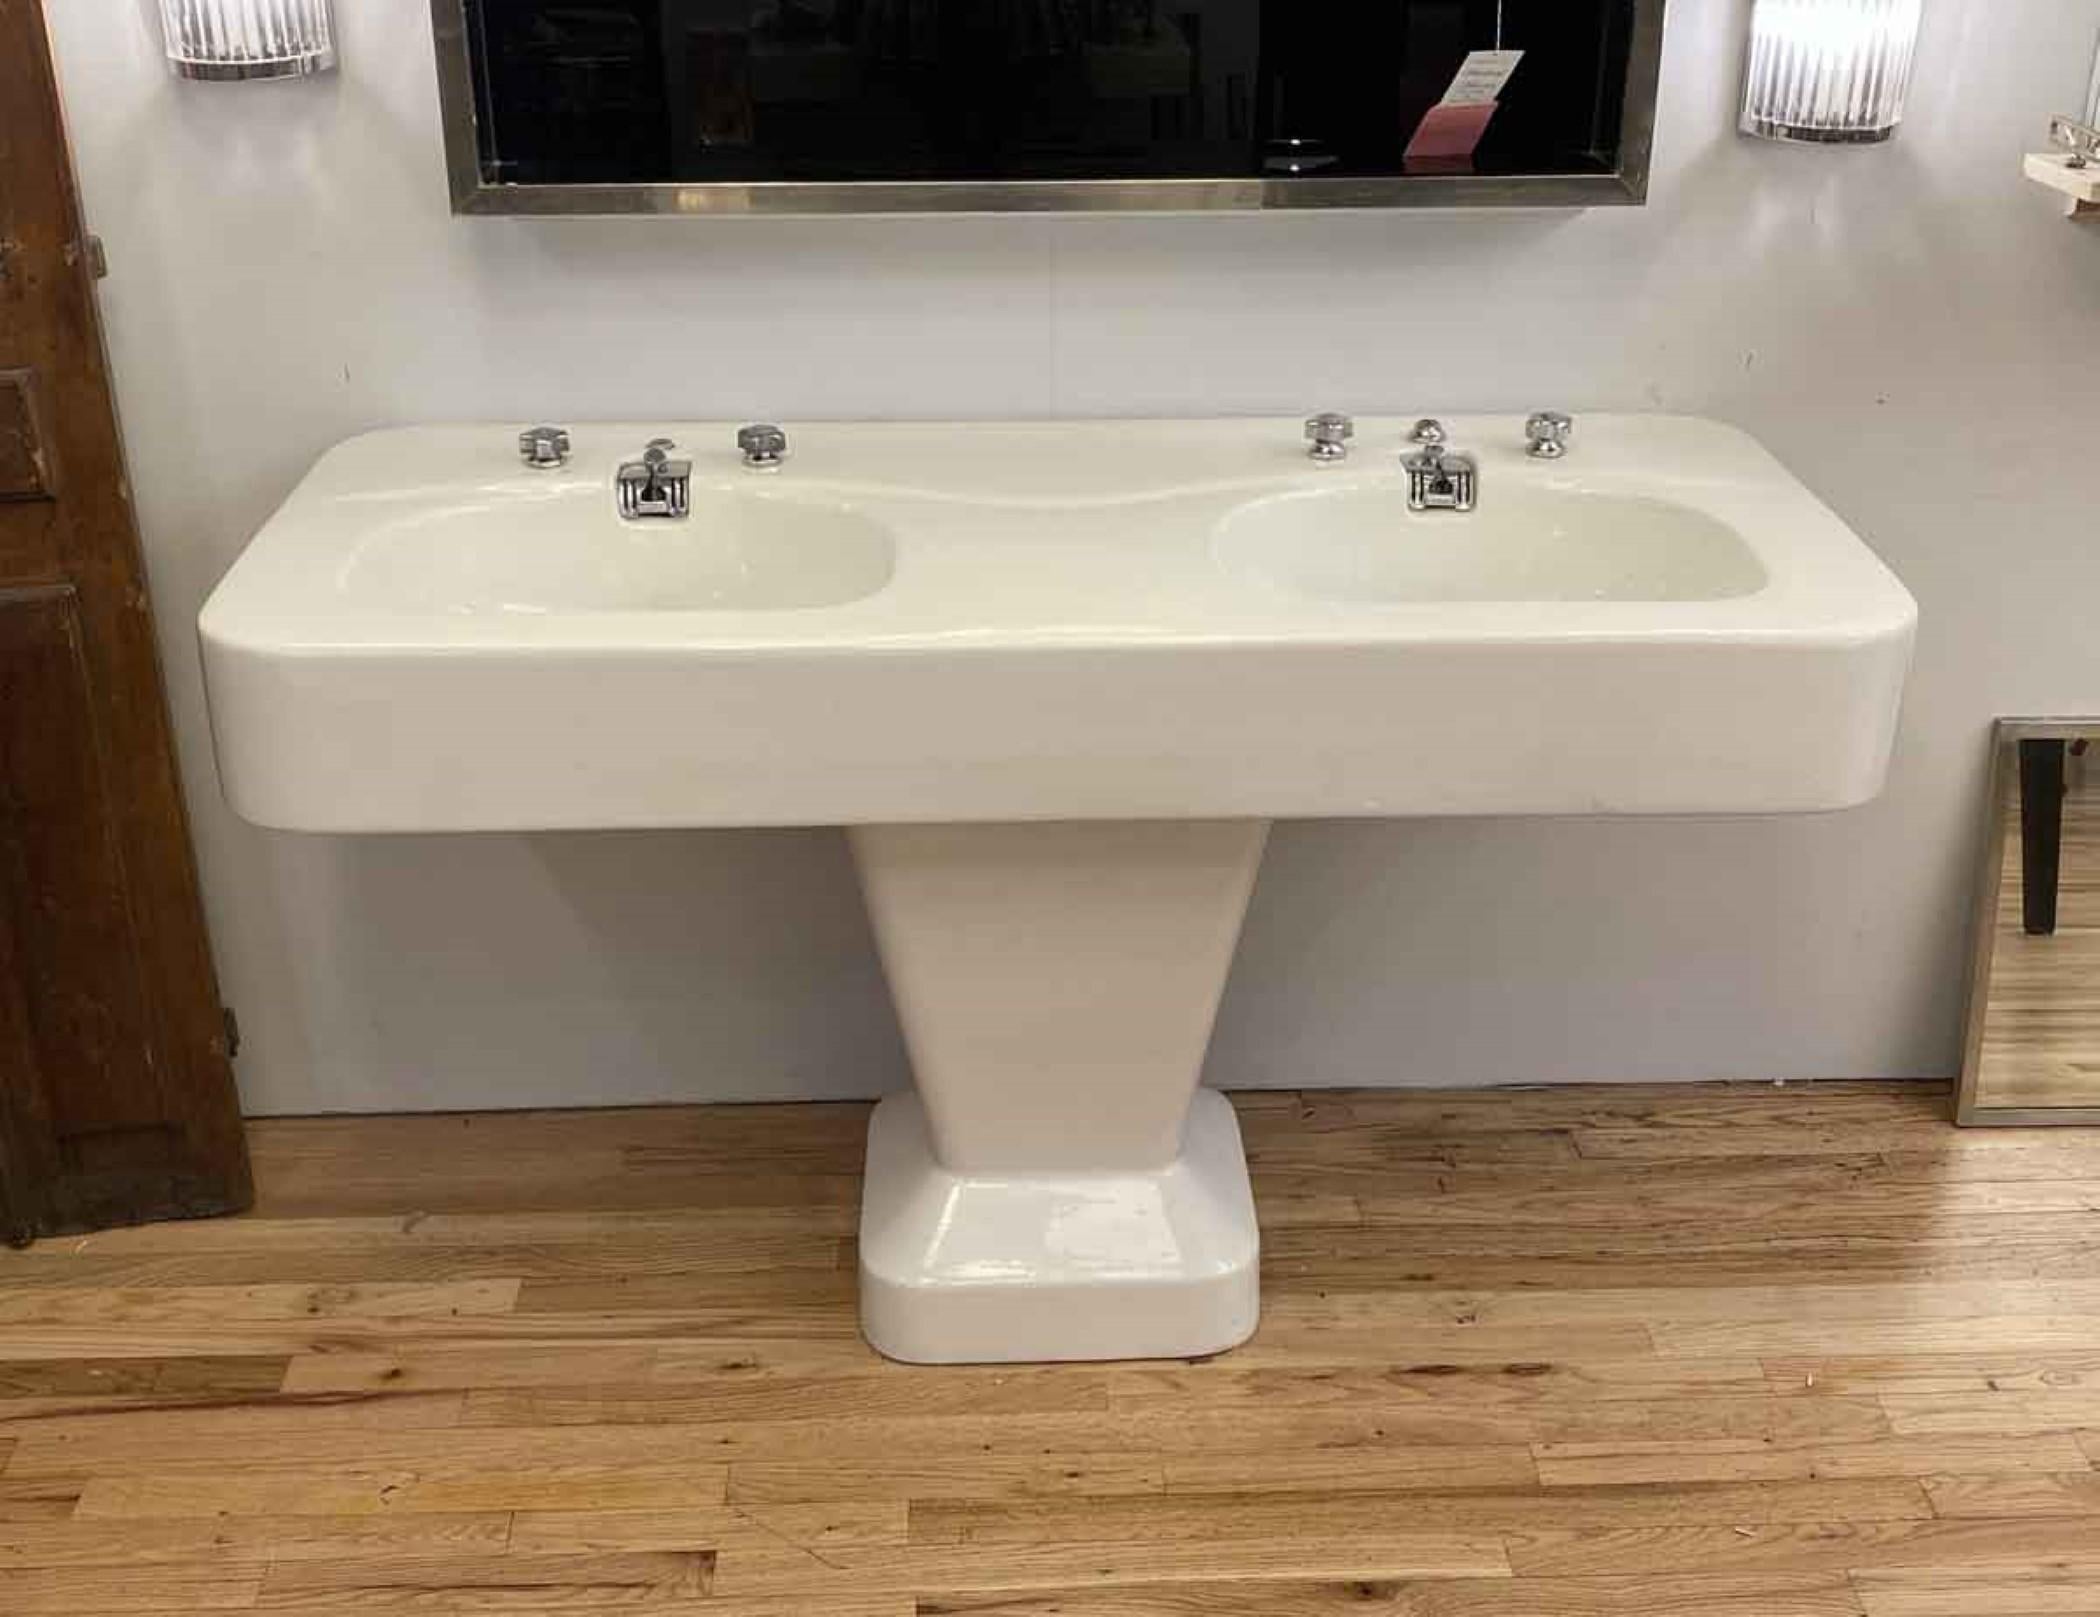 This extra wide French cast iron double basin porcelain sink is a rare find and in excellent condition. The original hardware is included. Geometric Art Deco wide pedestal provides a sturdy base to the double basin top. This was made in the